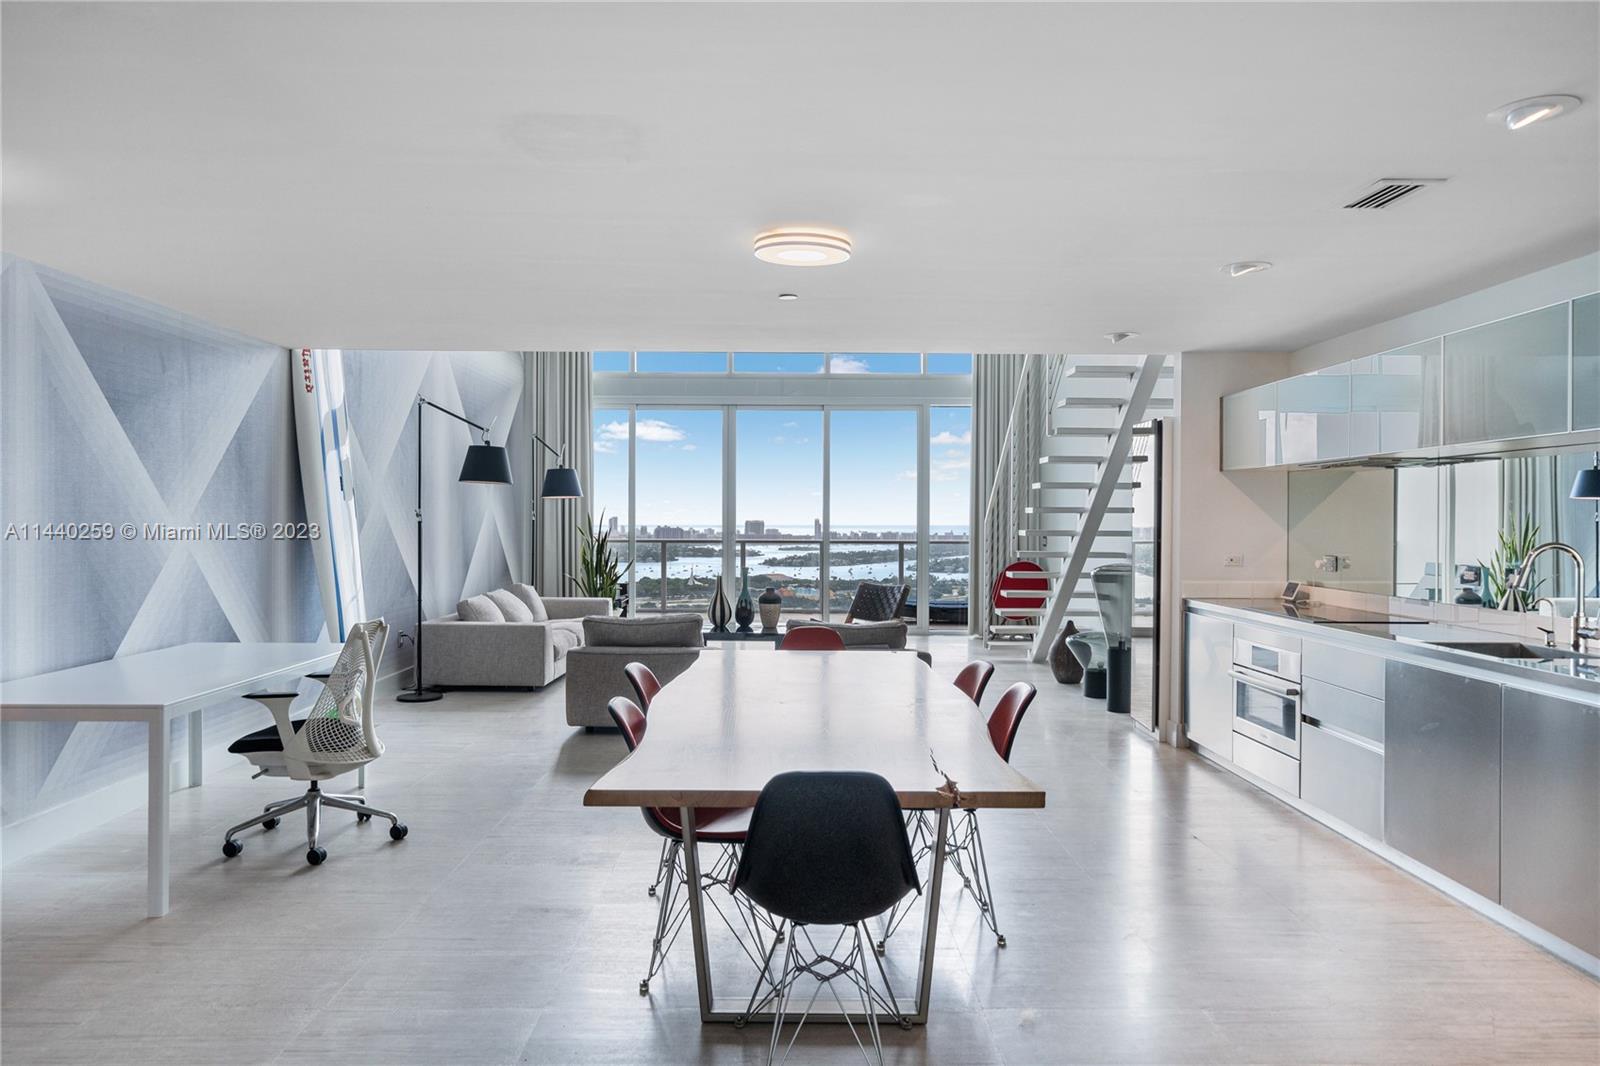 A truly unique, one-of-a-kind home in the sky! Welcome to unit 3202 at TMP, this designer finished 2 bedroom / 2.5 bath loft with over 1,802 S.F. featuring an oversized private 10x 20 terrace to enjoy some of the most stunning views one could find of Miami Beach, the Atlantic Ocean, Biscayne Bay, Downtown and on a clear day all the way to Sunny Isles. Finished with timeless large format, vein cut travertine flooring throughout including terrace, custom wallpaper by acclaimed fine artist Johnny Robles, a Bosch induction cooktop, a Bosch under counter convection microwave/oven combo, polished S.S. switch plates as well as a mirrored kitchen backsplash and more. TMP is a full-service luxury building, with fitness center, Clinique La Prairie Spa and S. of 5th private beach club membership.